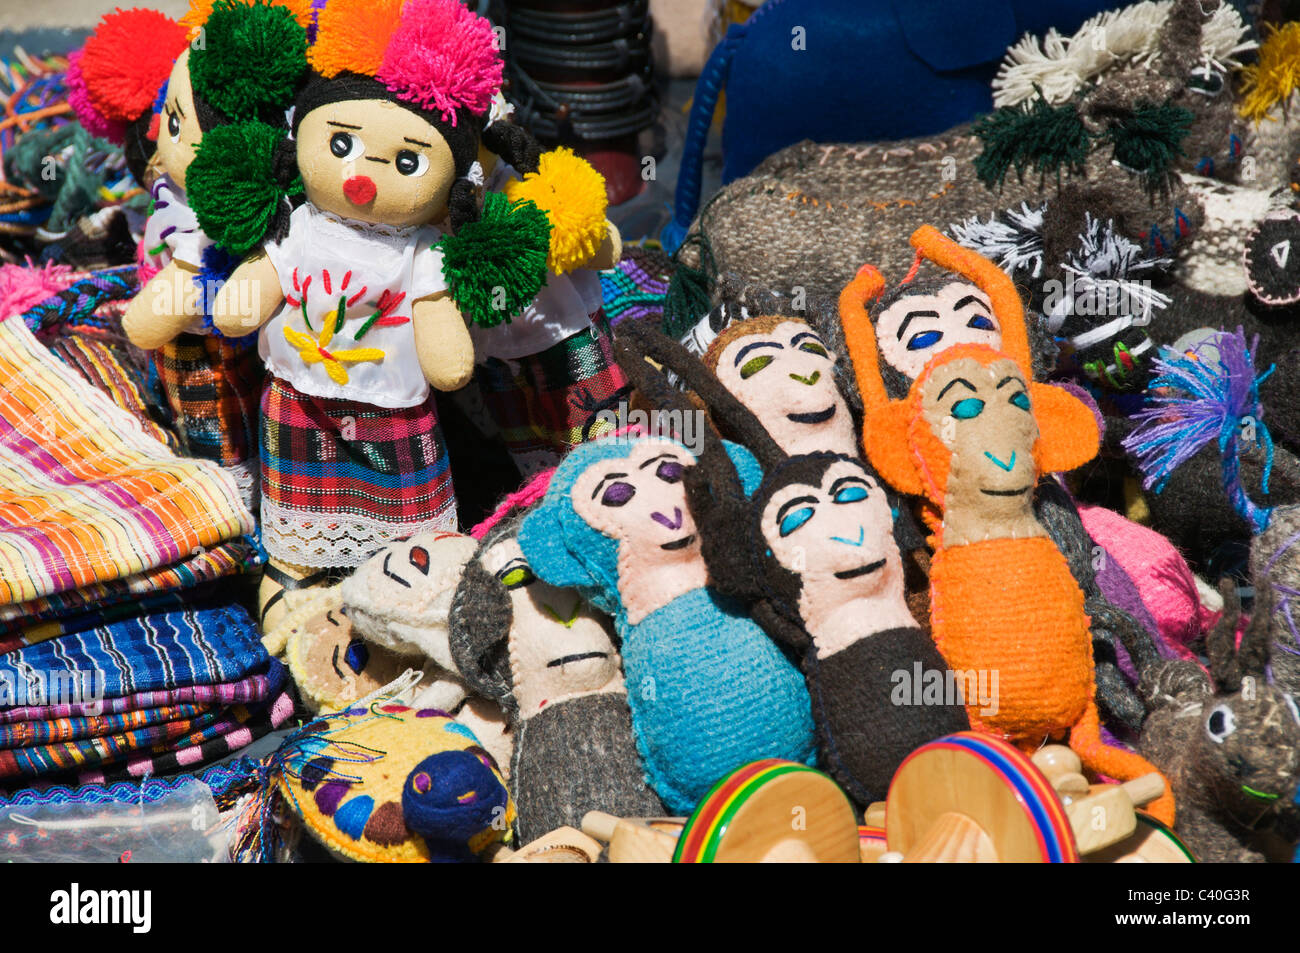 An assortment of colorful handmade dolls and animals is on display for sale by a street vendor in downtown Sayulita, Mexico. Stock Photo